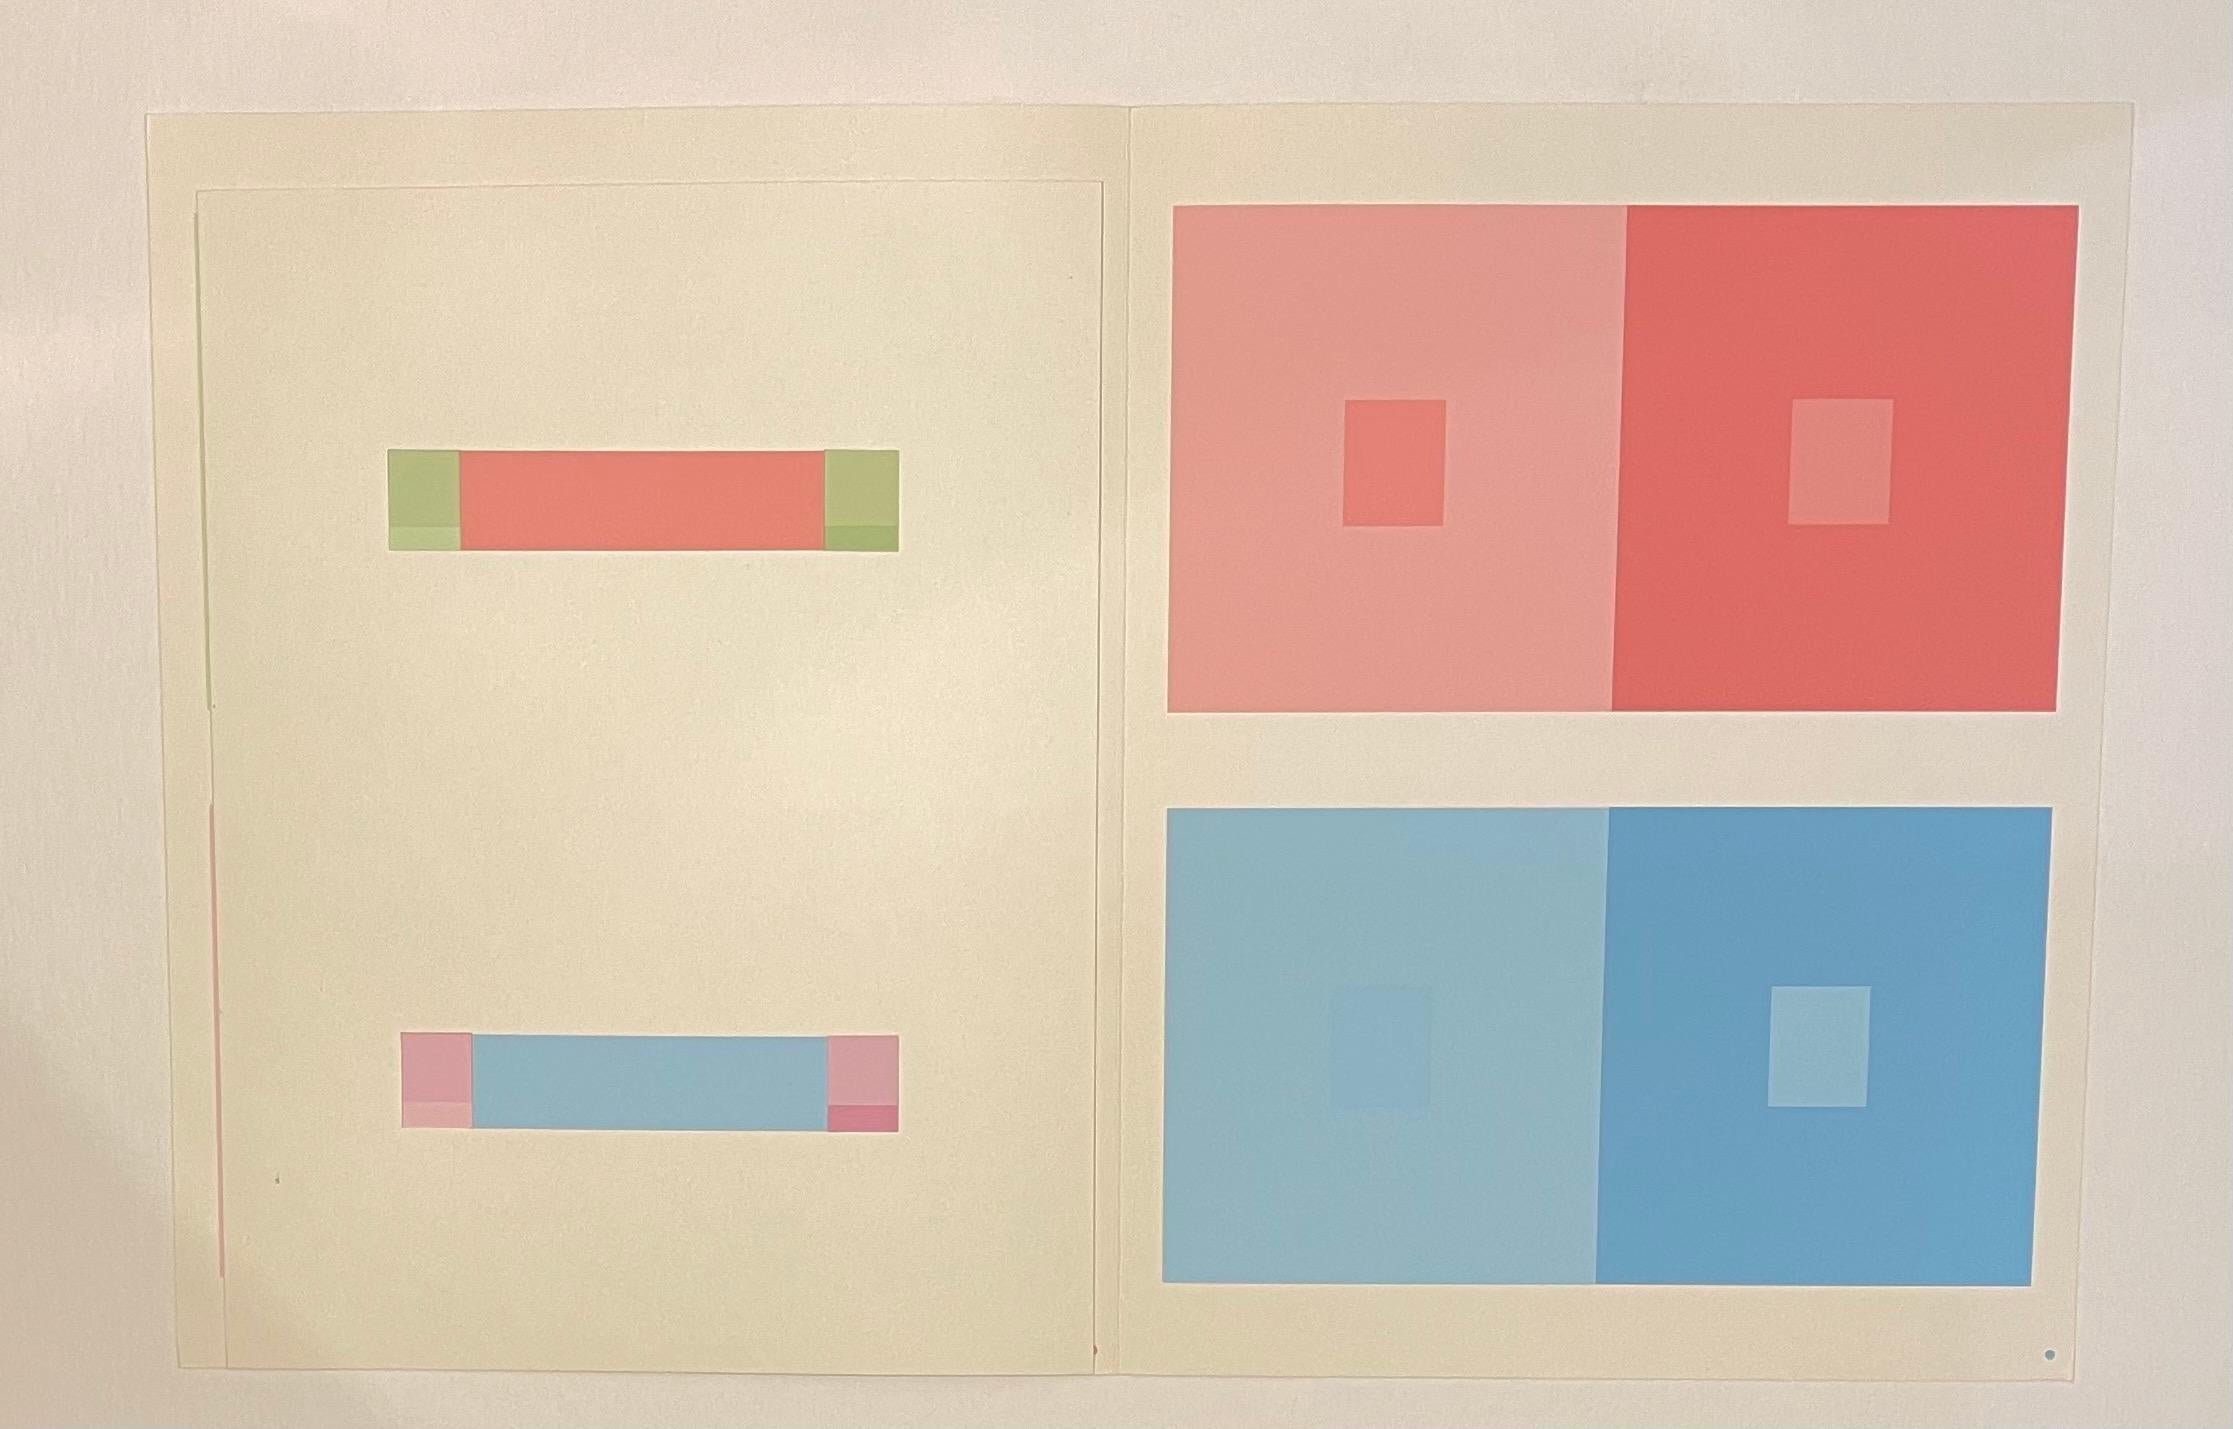 (Albers, Josef). INTERACTION OF COLOR by Josef Albers. Yale University Press, New Haven, 1963. Edition of 2000 copies, of which there were 50 signed and numbered by Albers (this NOT being one of the signed copies). Large quarto. Cloth slipcase